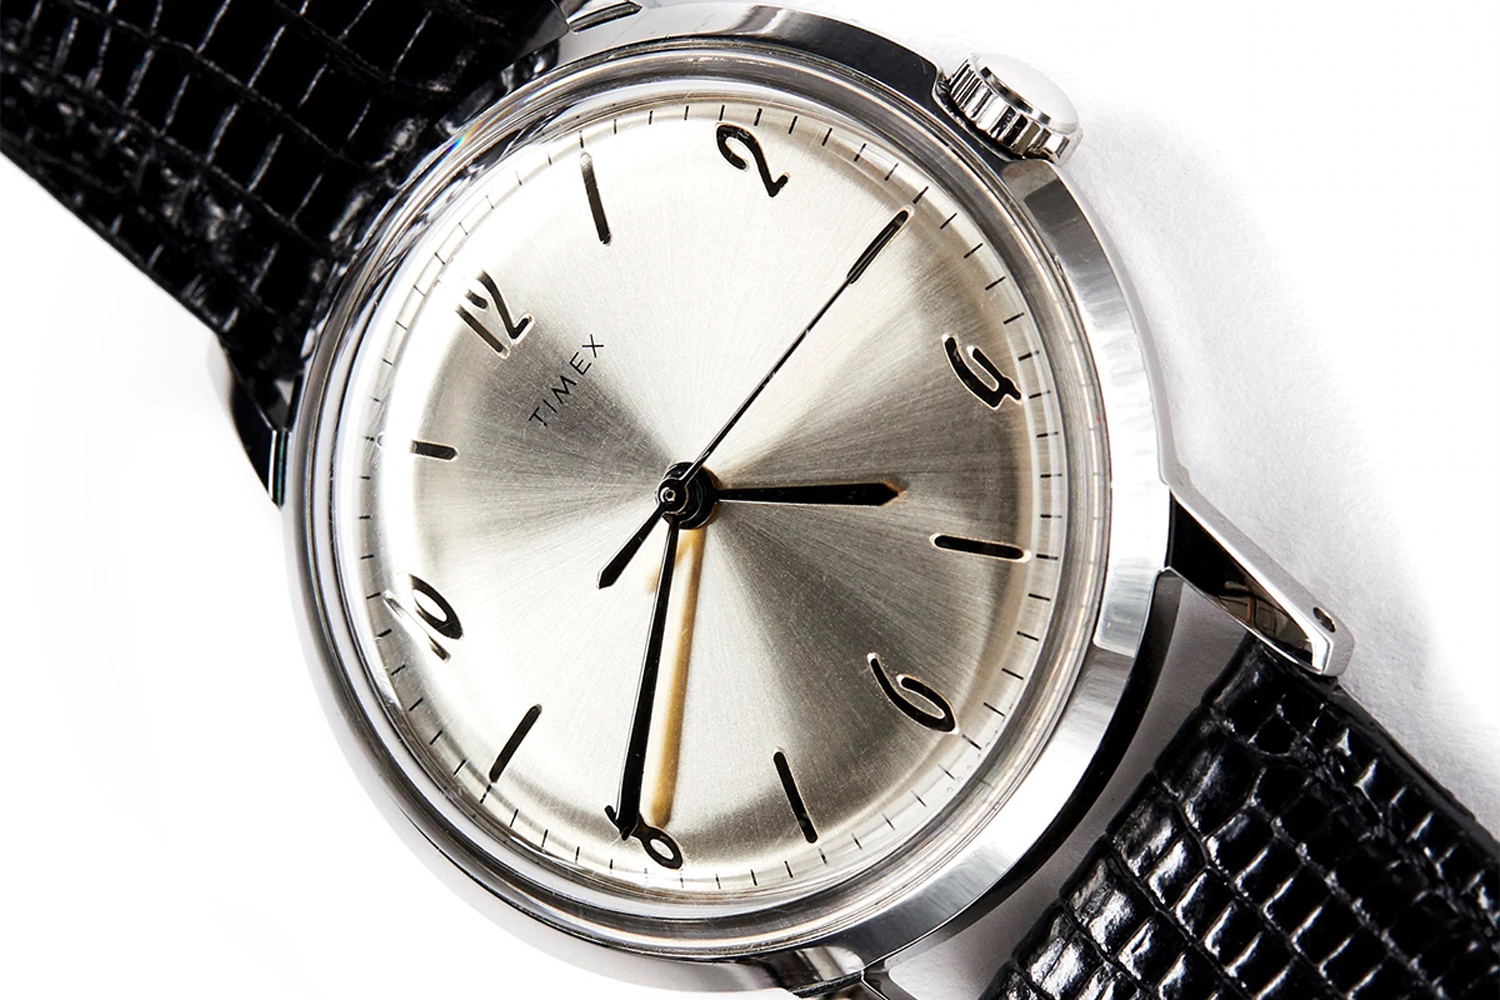 A silver faced Timex+Todd Snyder watch on a white background